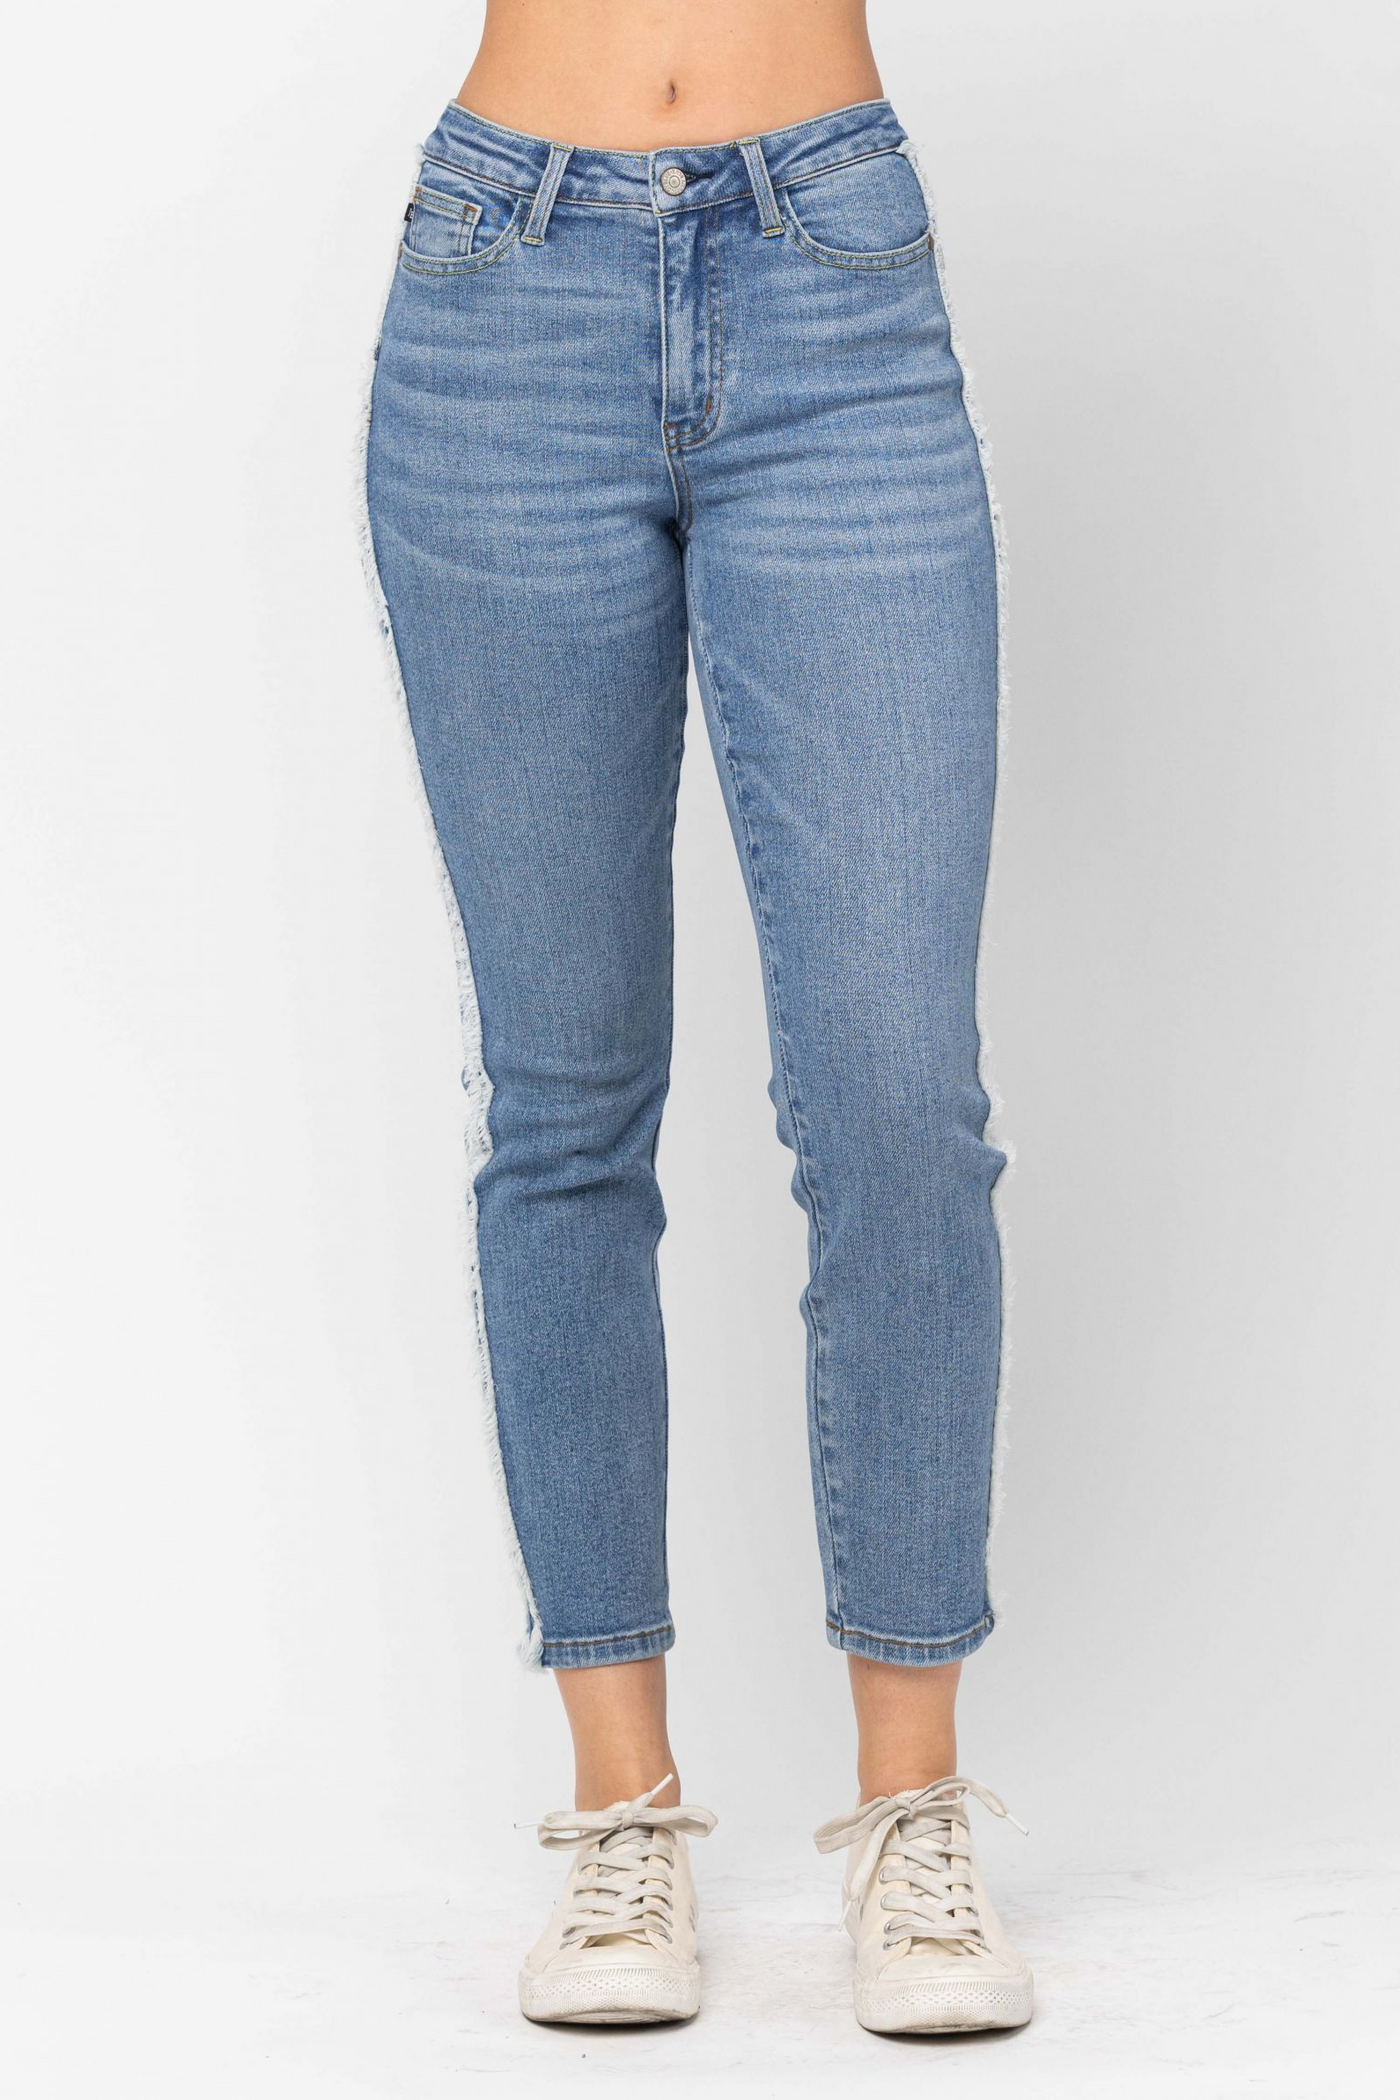 Judy Blue Take Down Side Fray Jeans